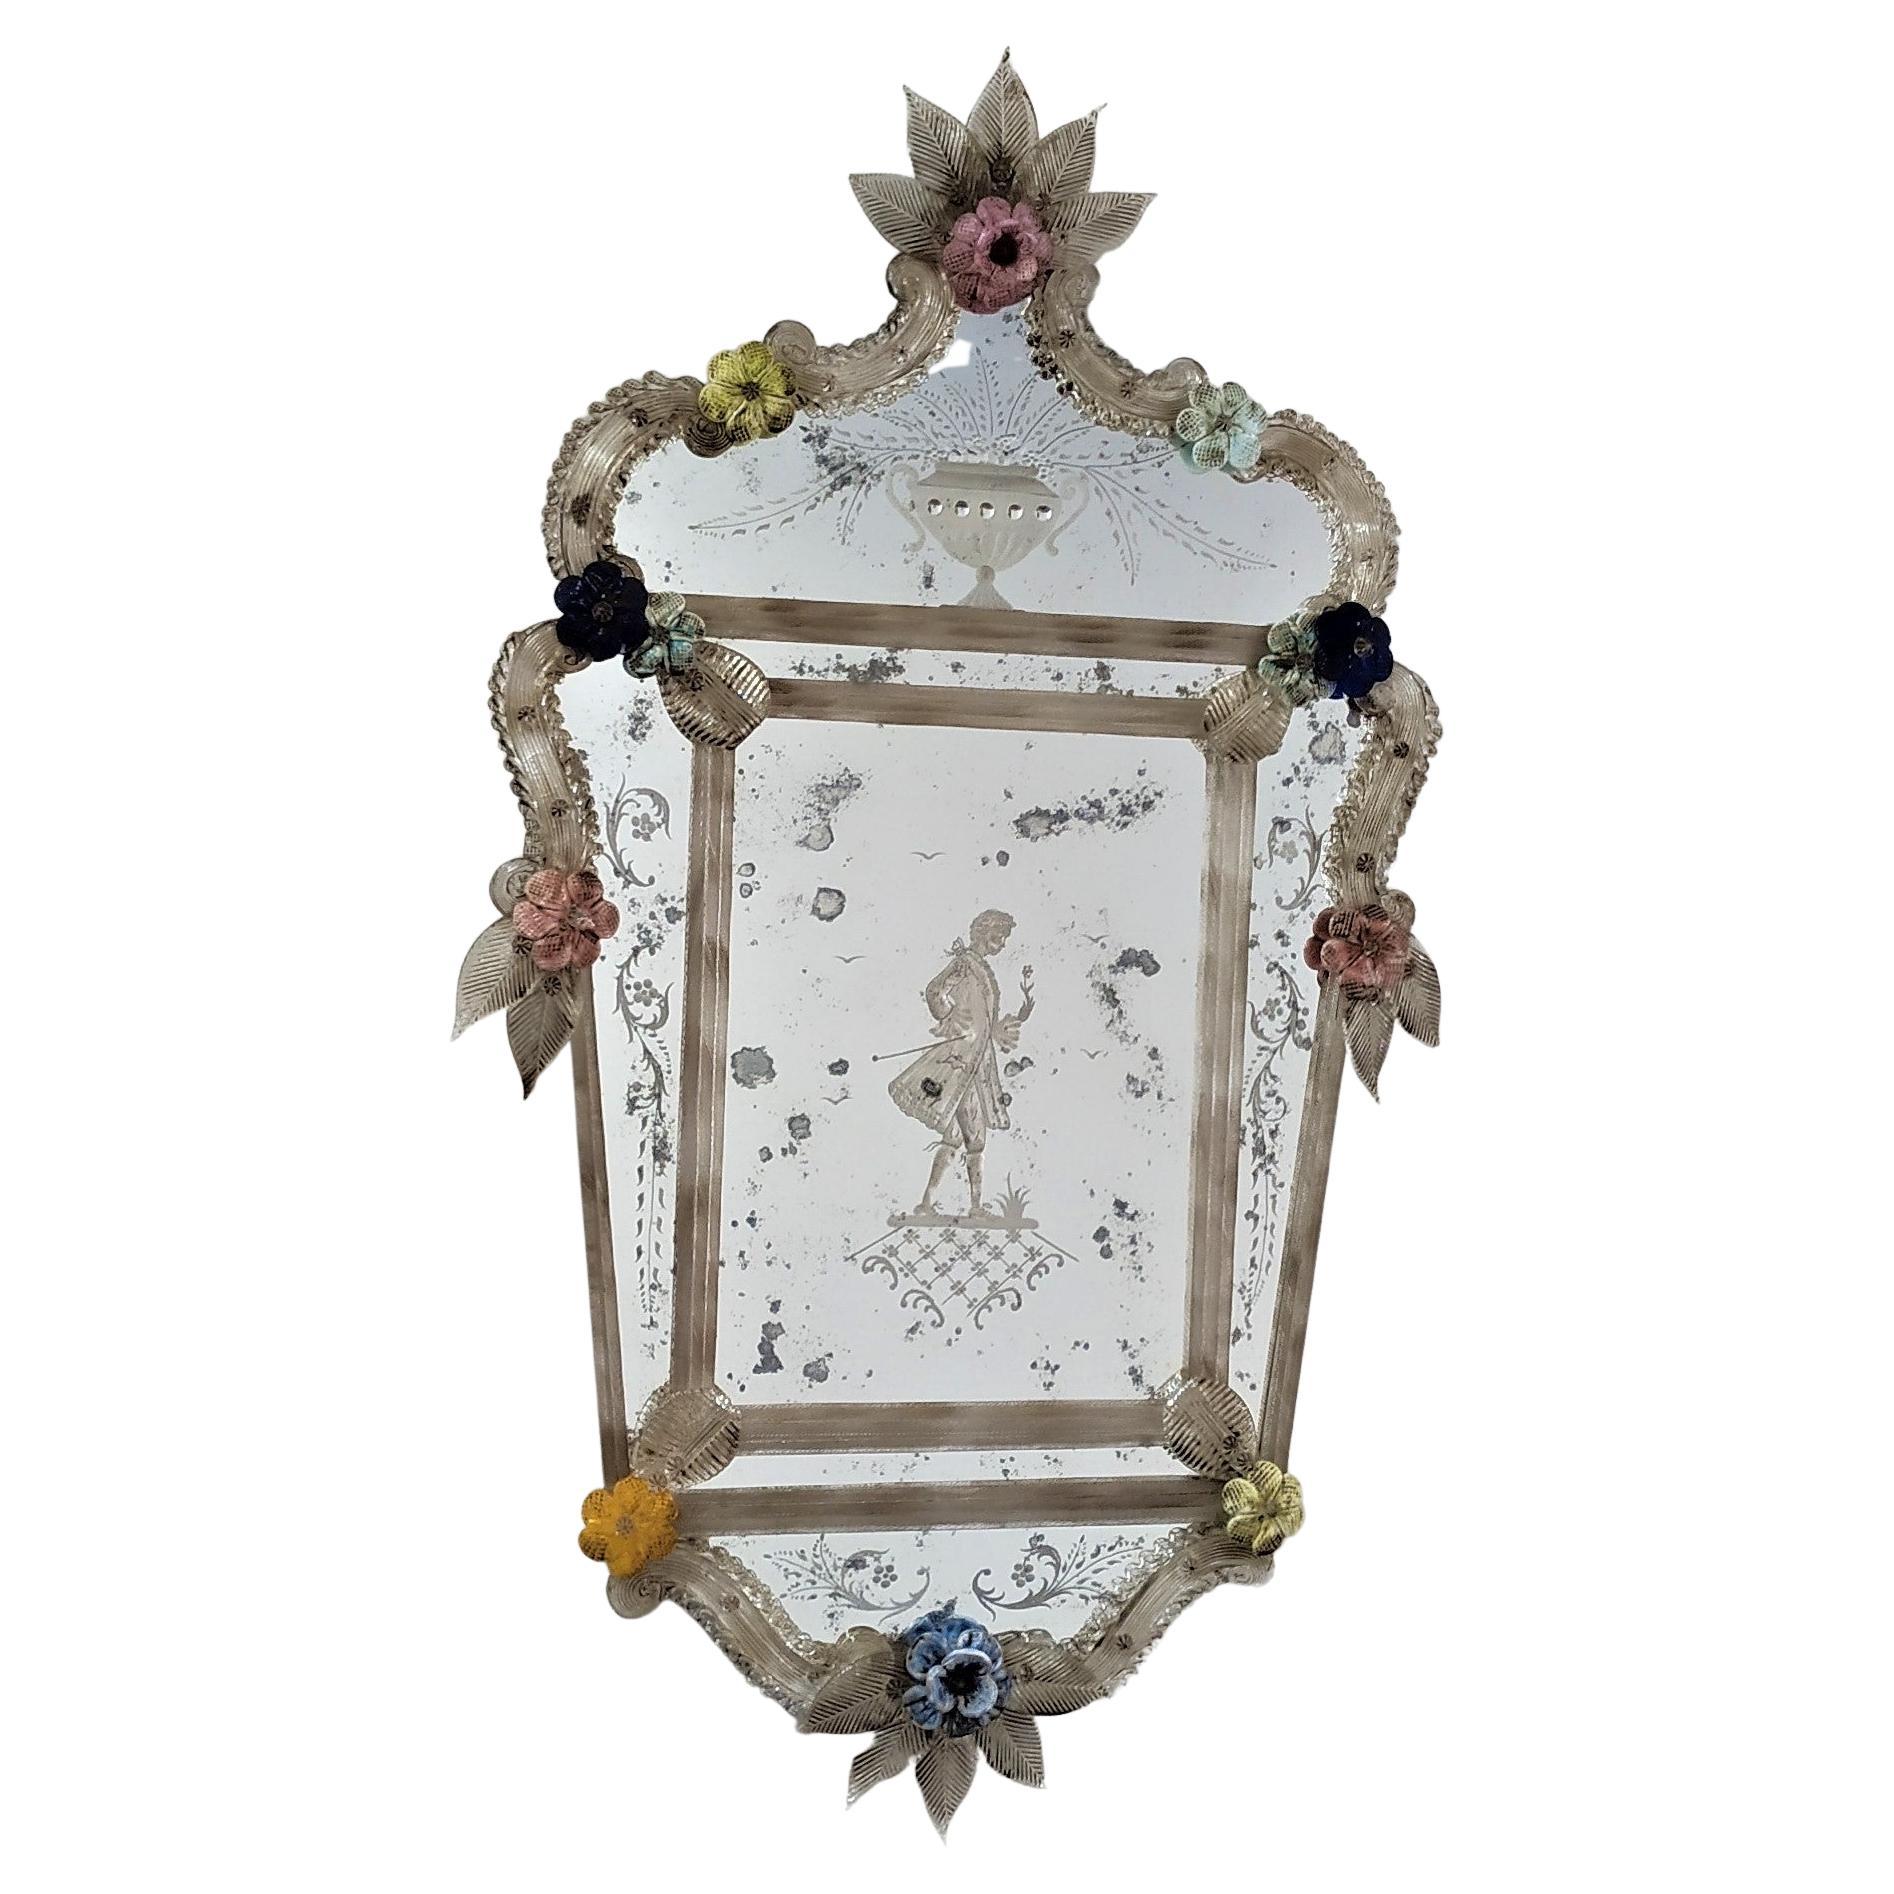 "Cavaliere" Reproduction of Venetian Mirror by Fratelli Tosi Murano